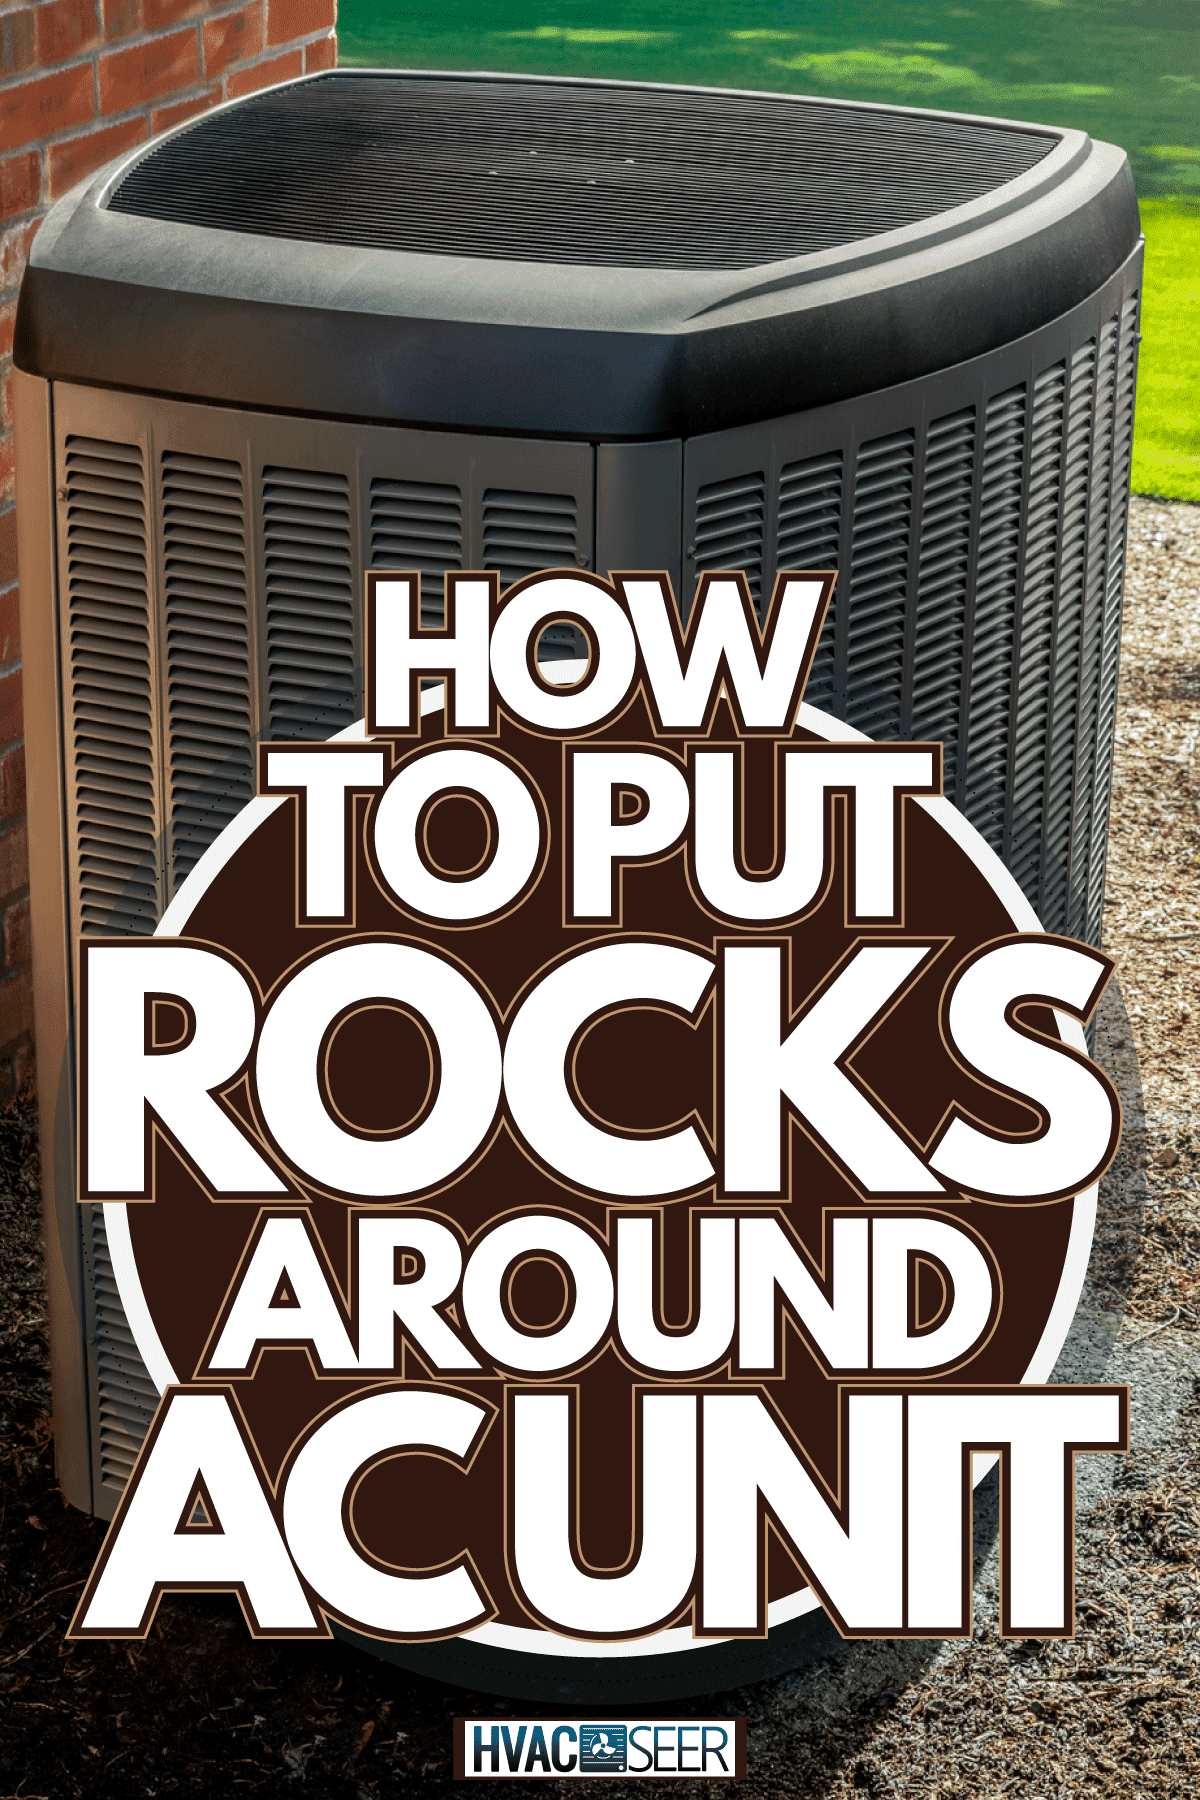 Doing some landscape for your outdoor AC Unit, How To Put Rocks Around AC Unit